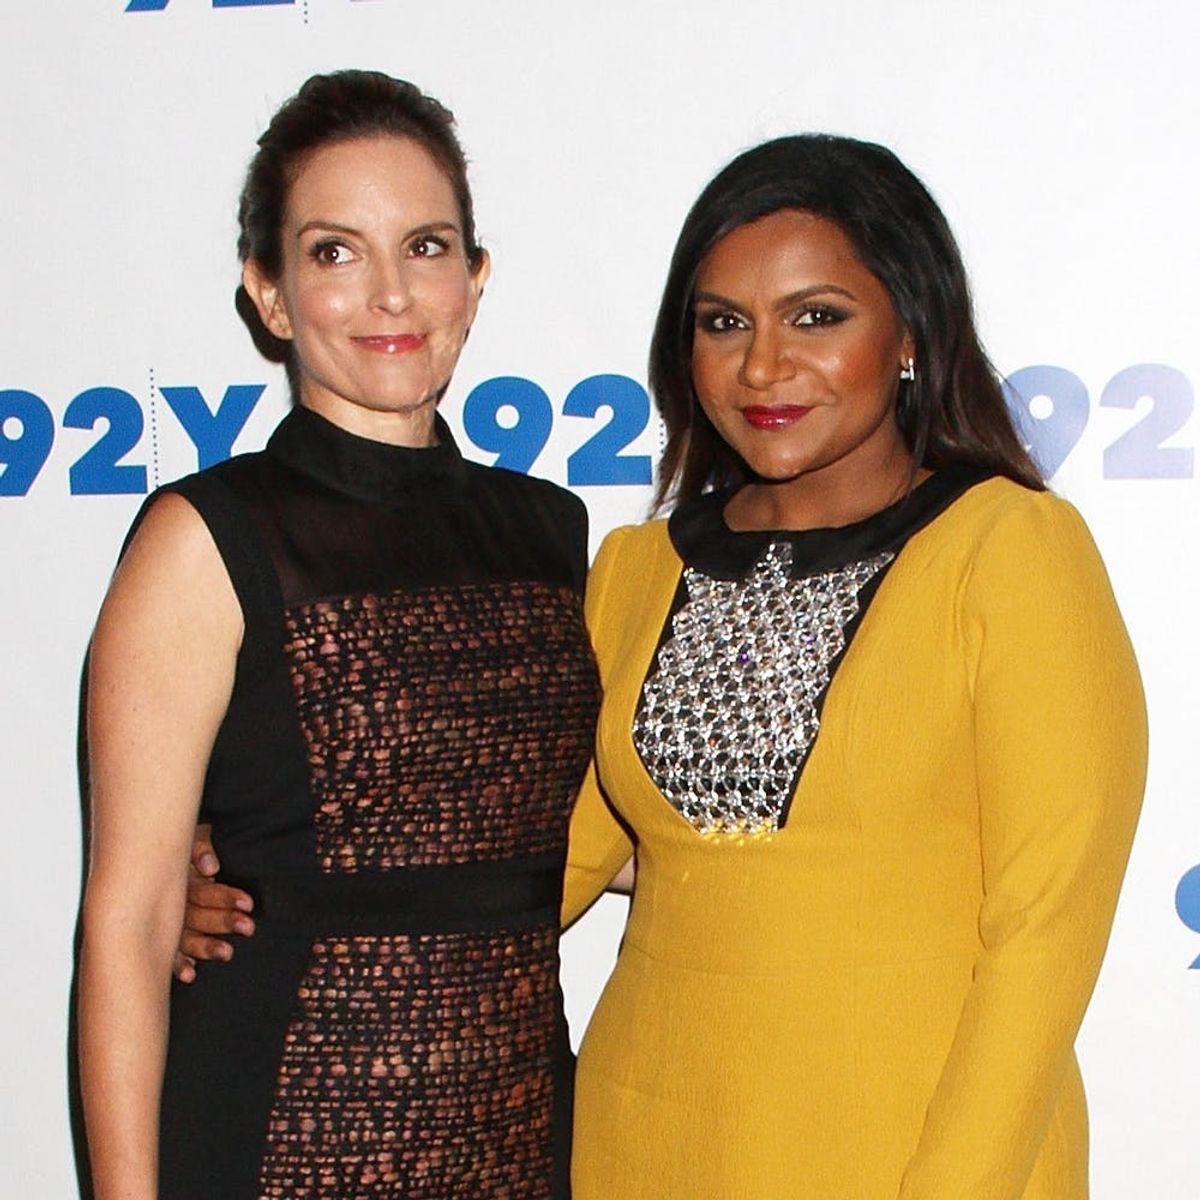 Mindy Kaling and Tina Fey Are BOTH Working on Hilarious New Shows